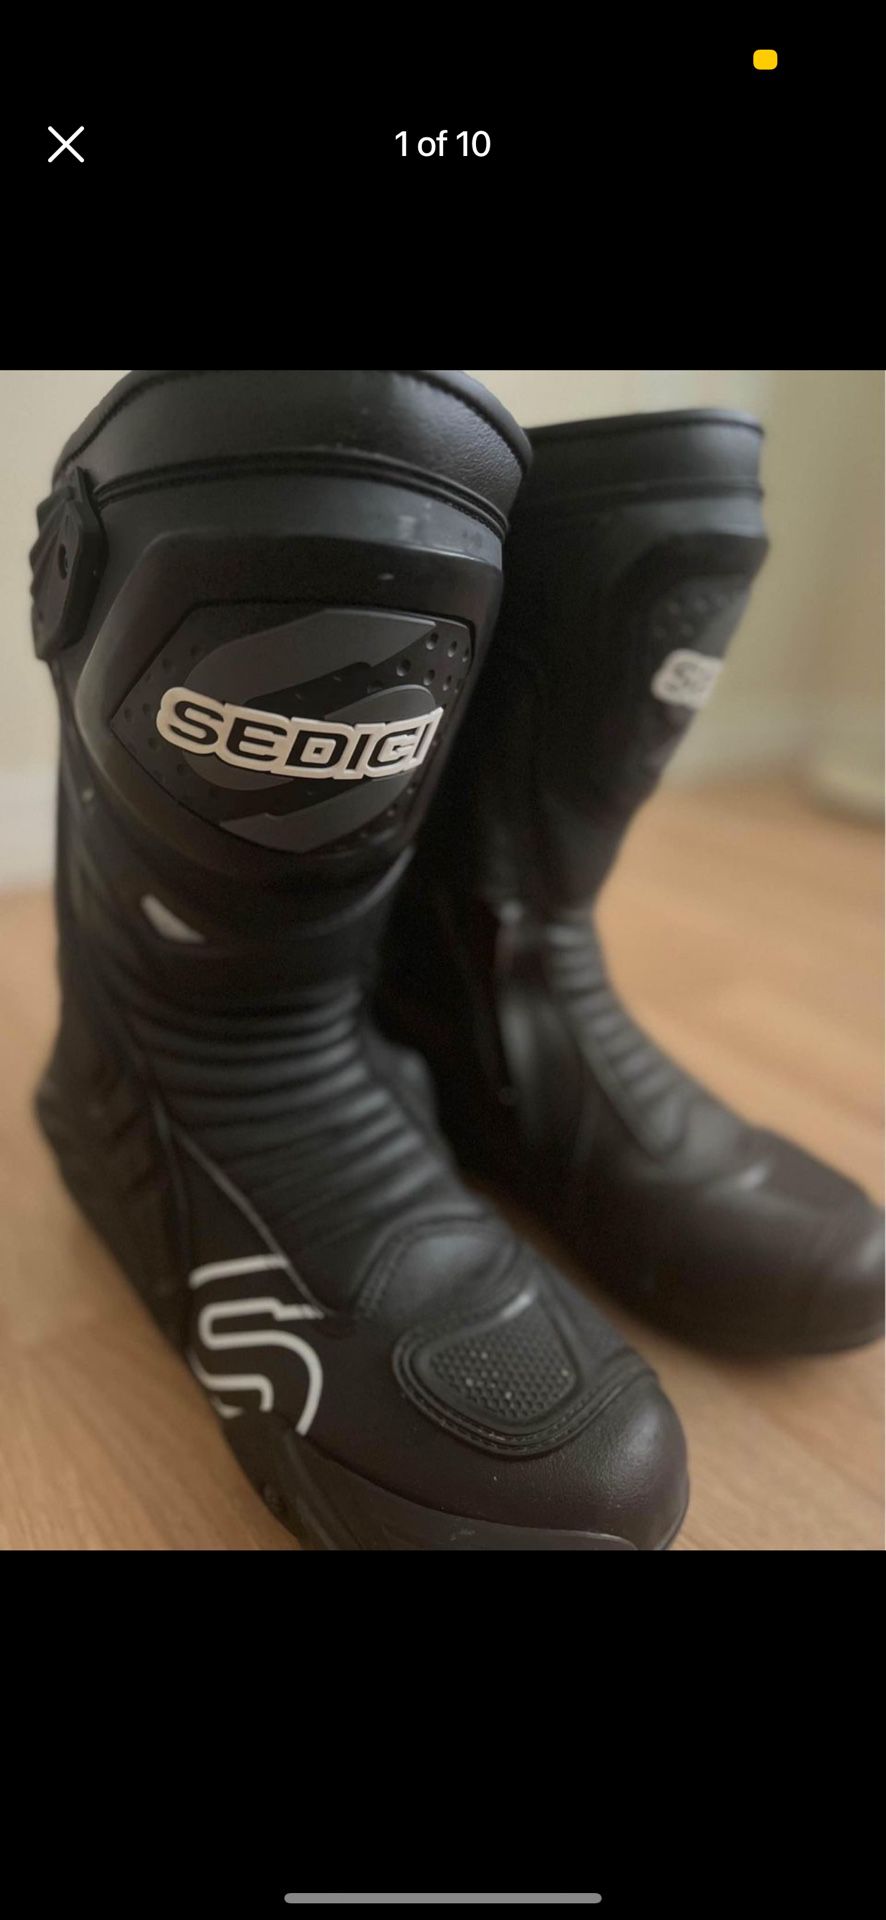 SEDICI Motorcycle Riding Boots Size 9